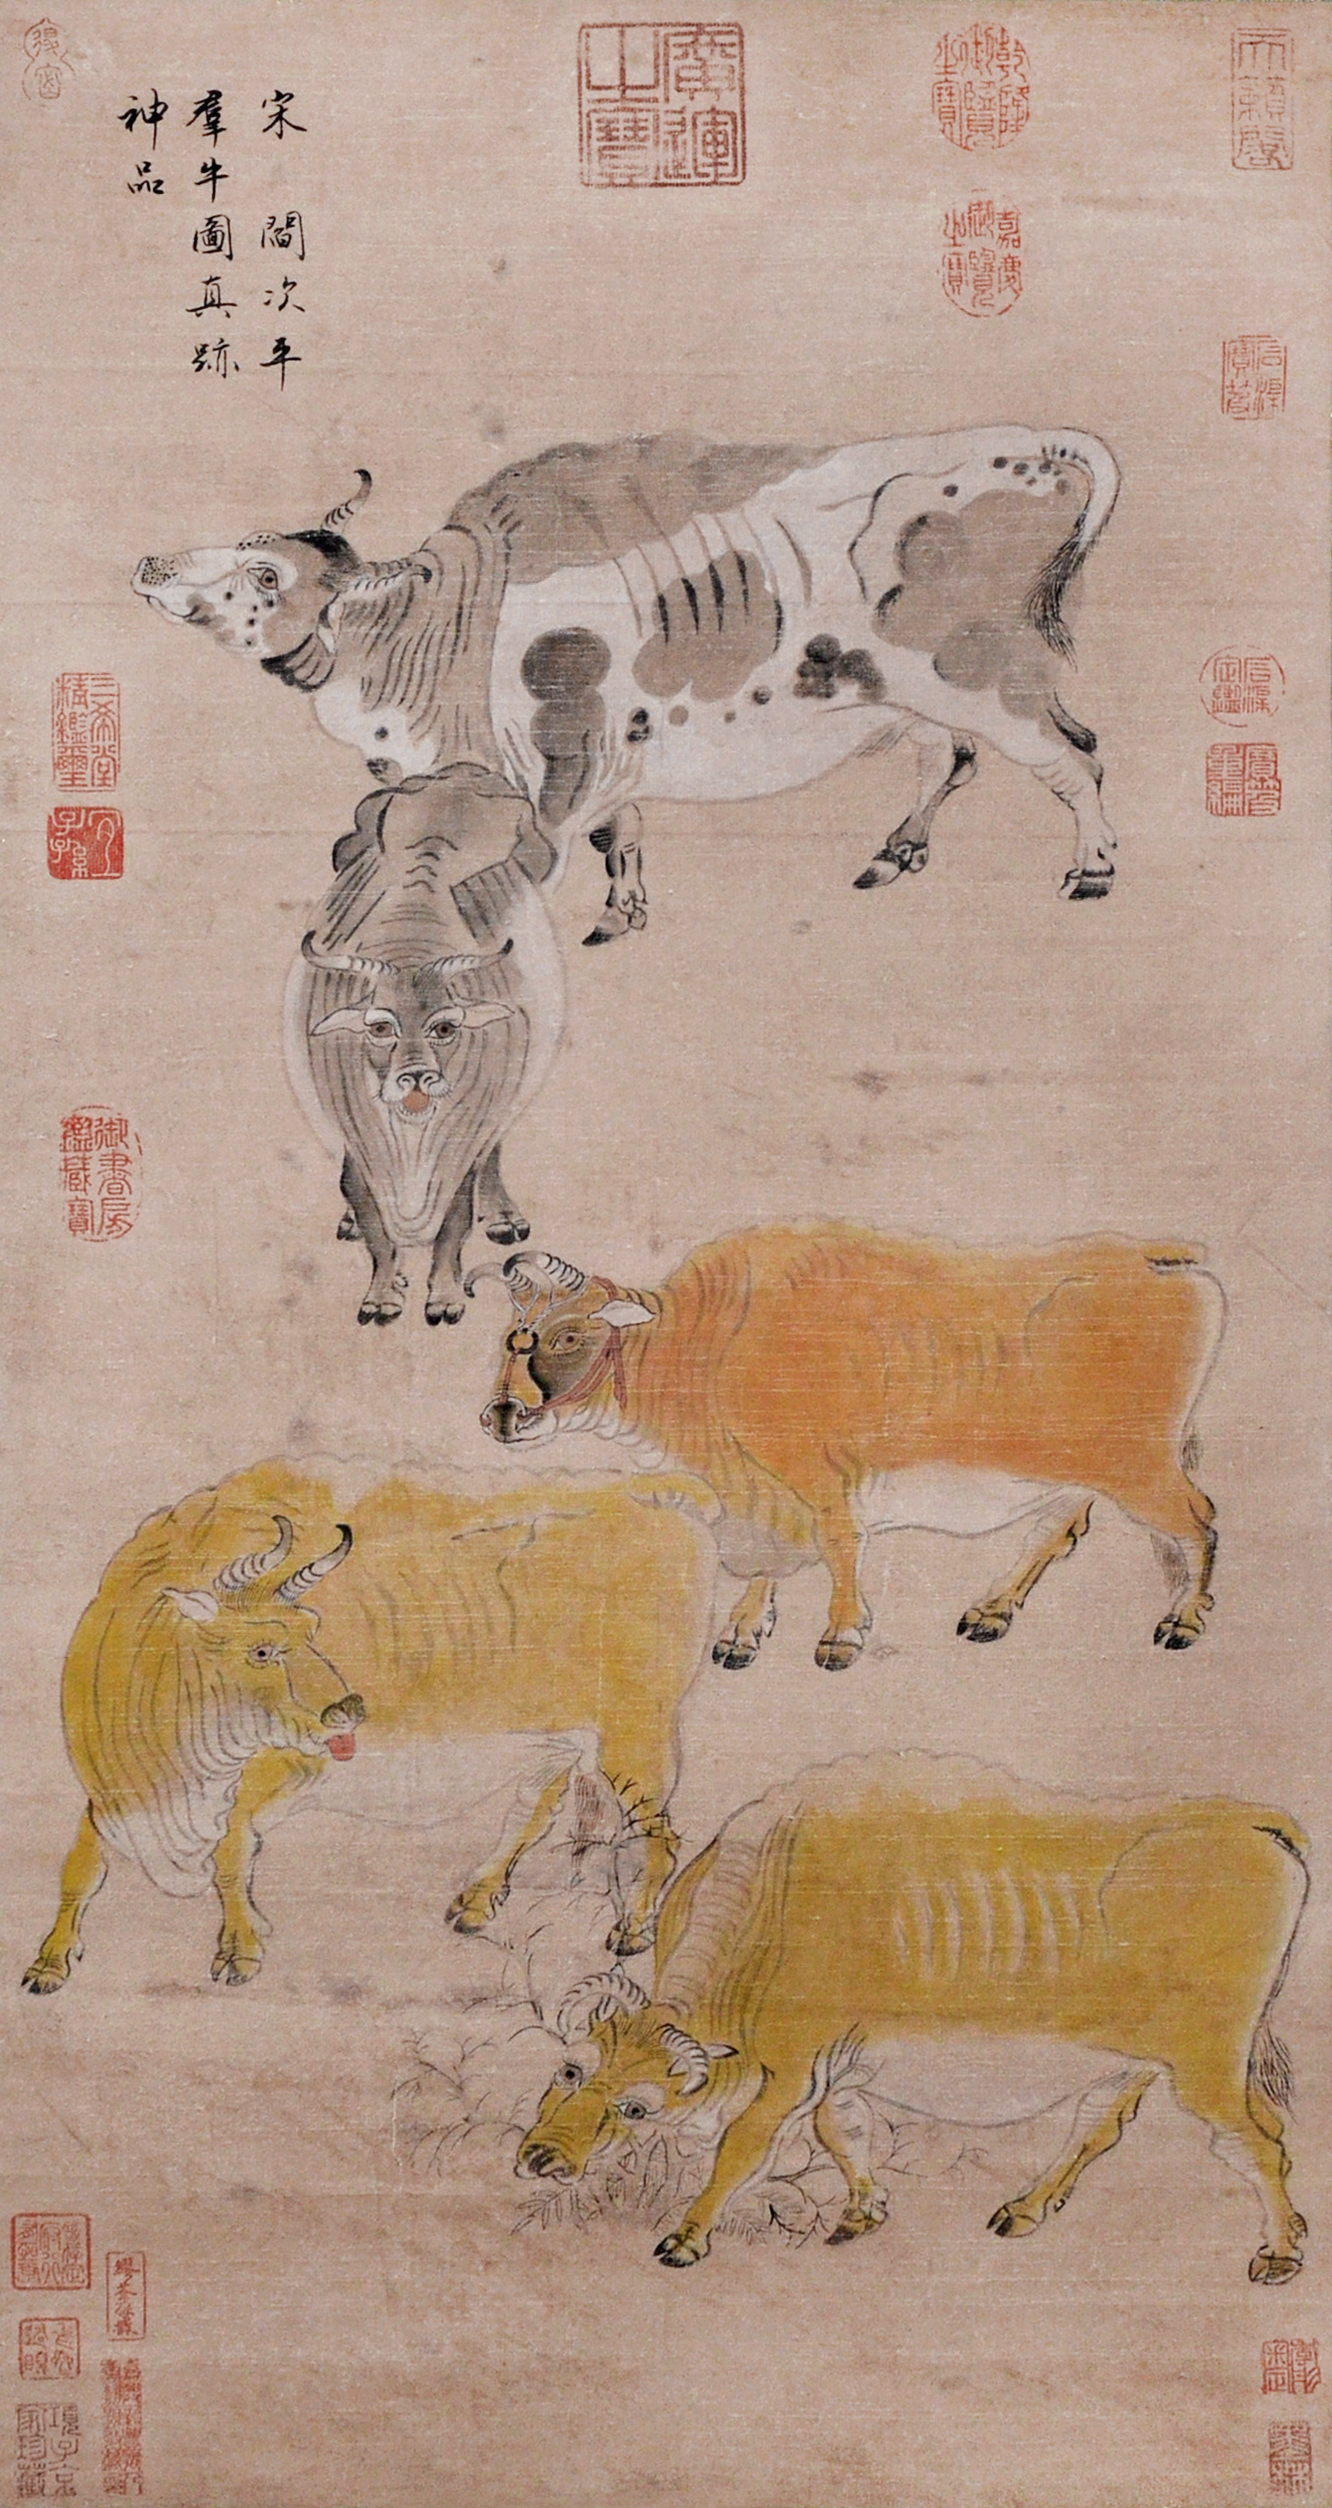 Five Cattle by Yan Ciping of the Southern Song Dynasty.